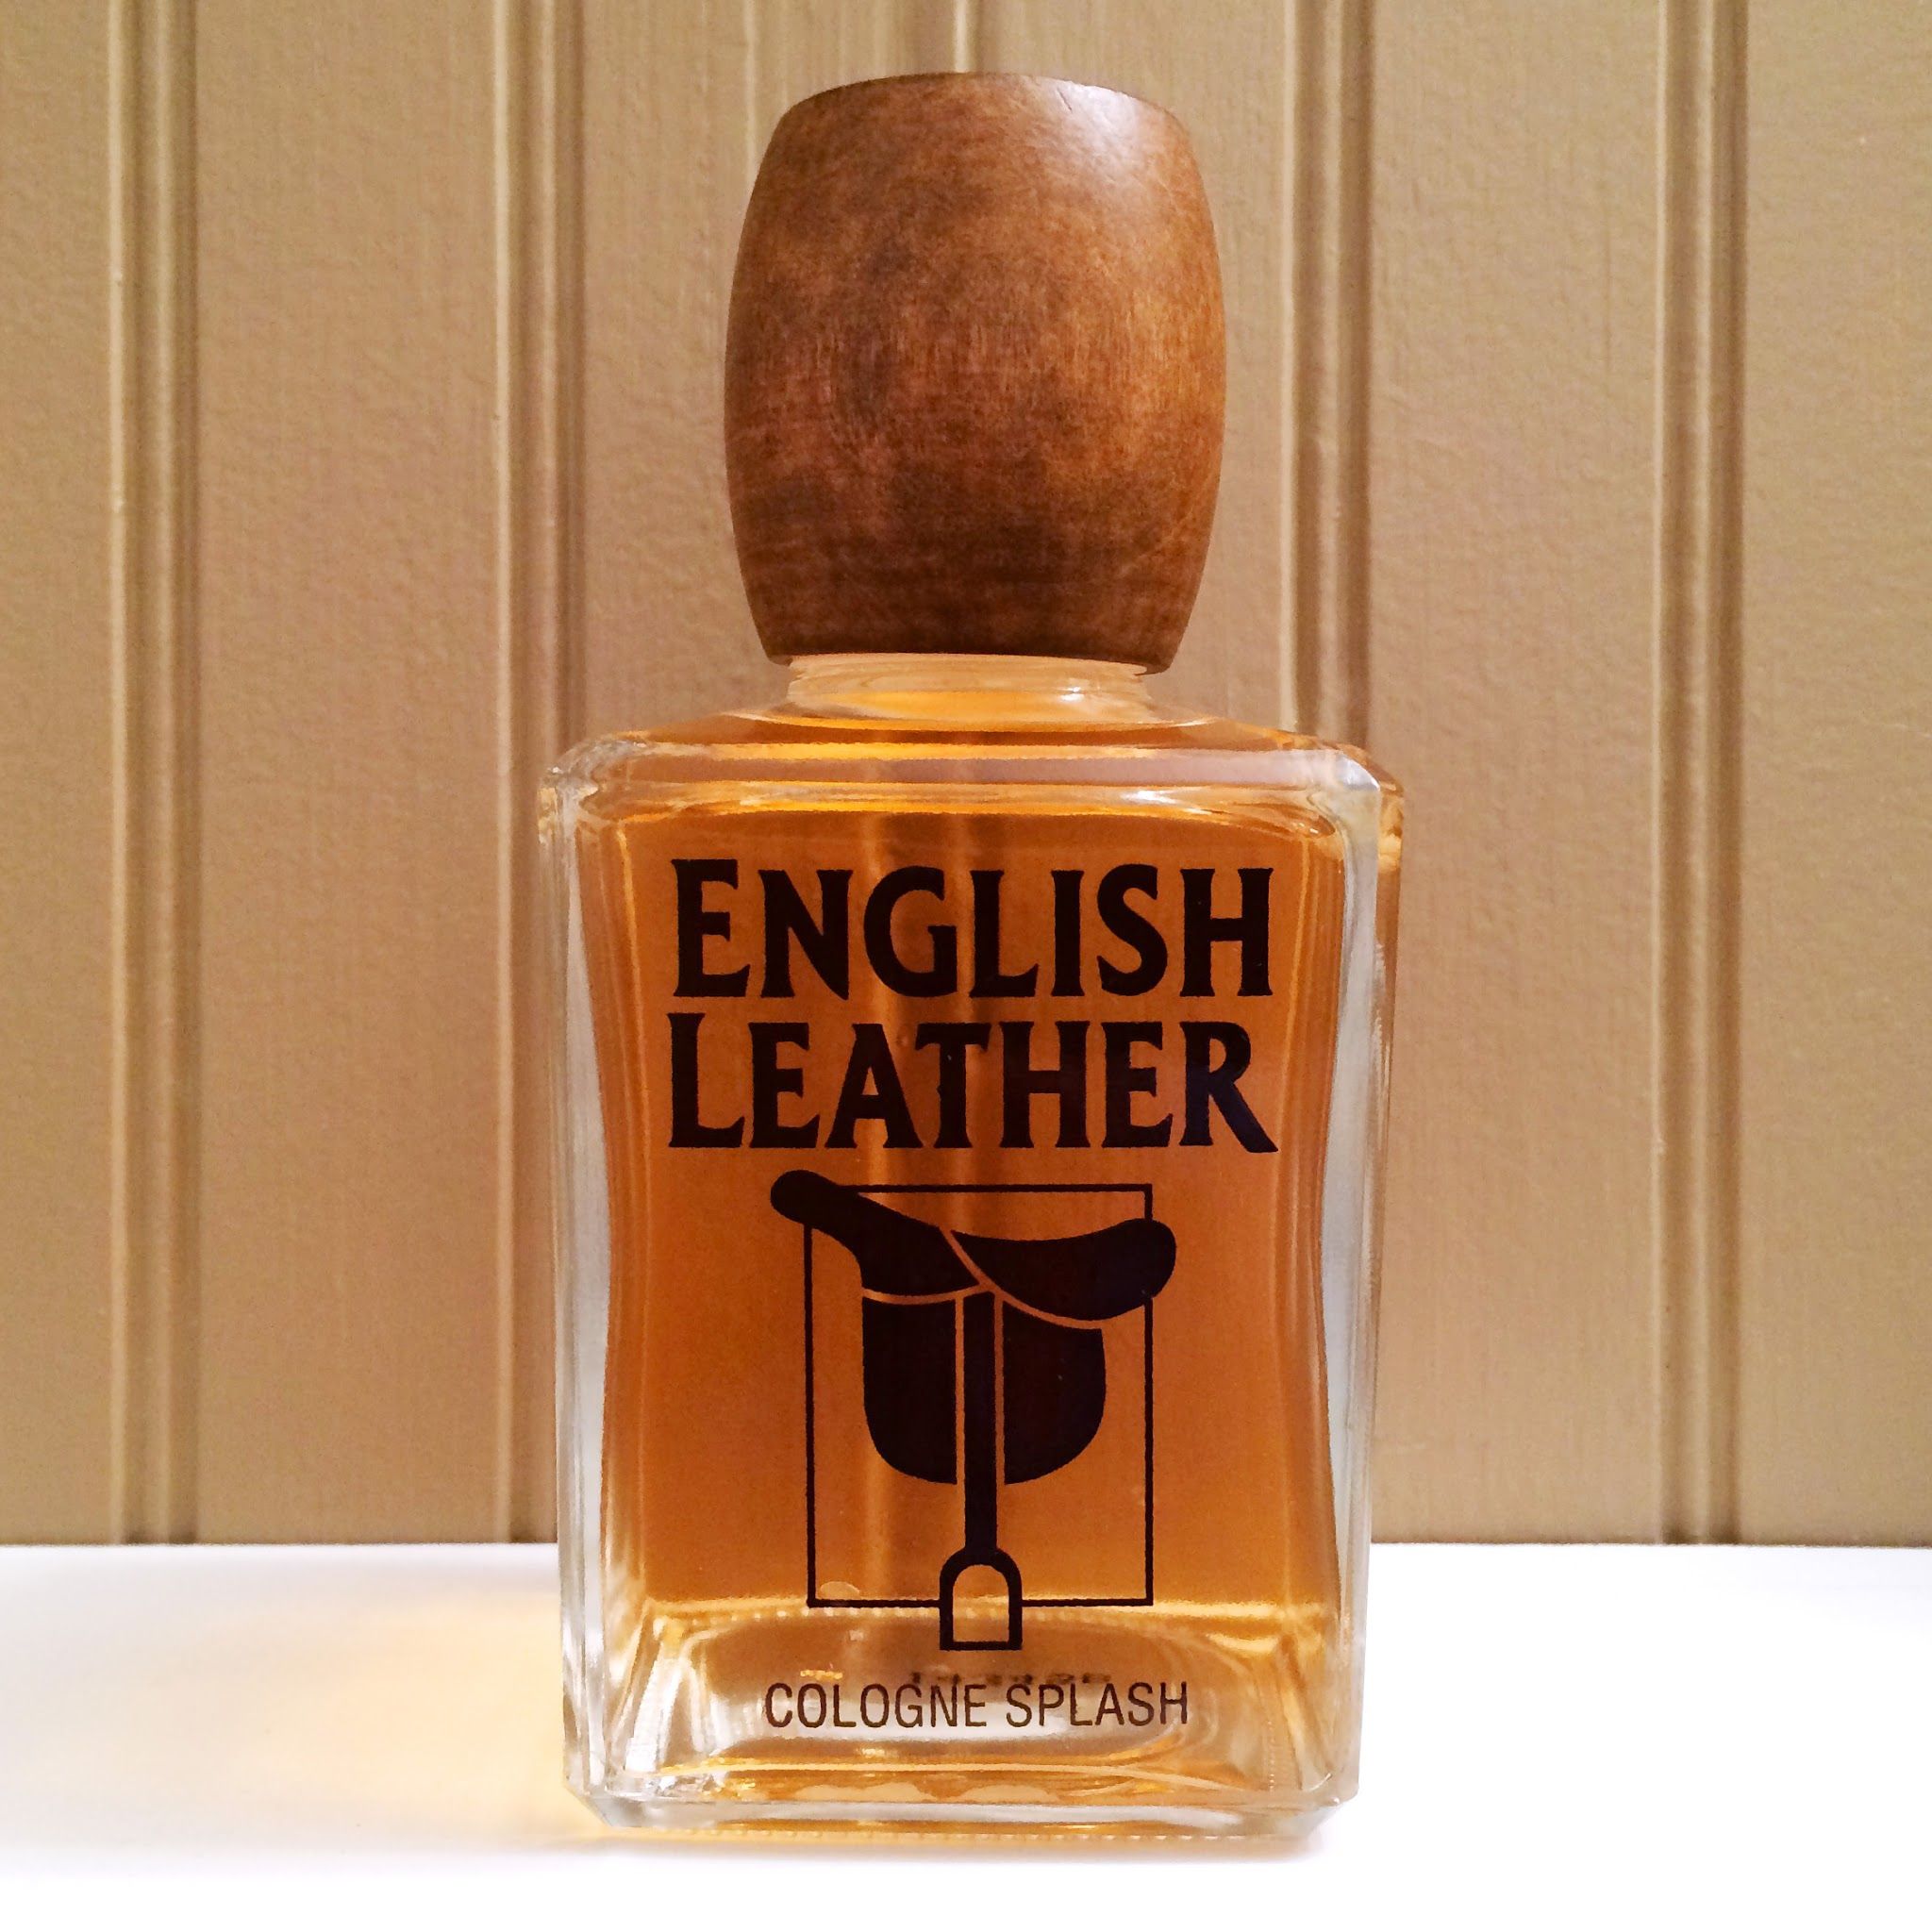 English Leather - First Impression